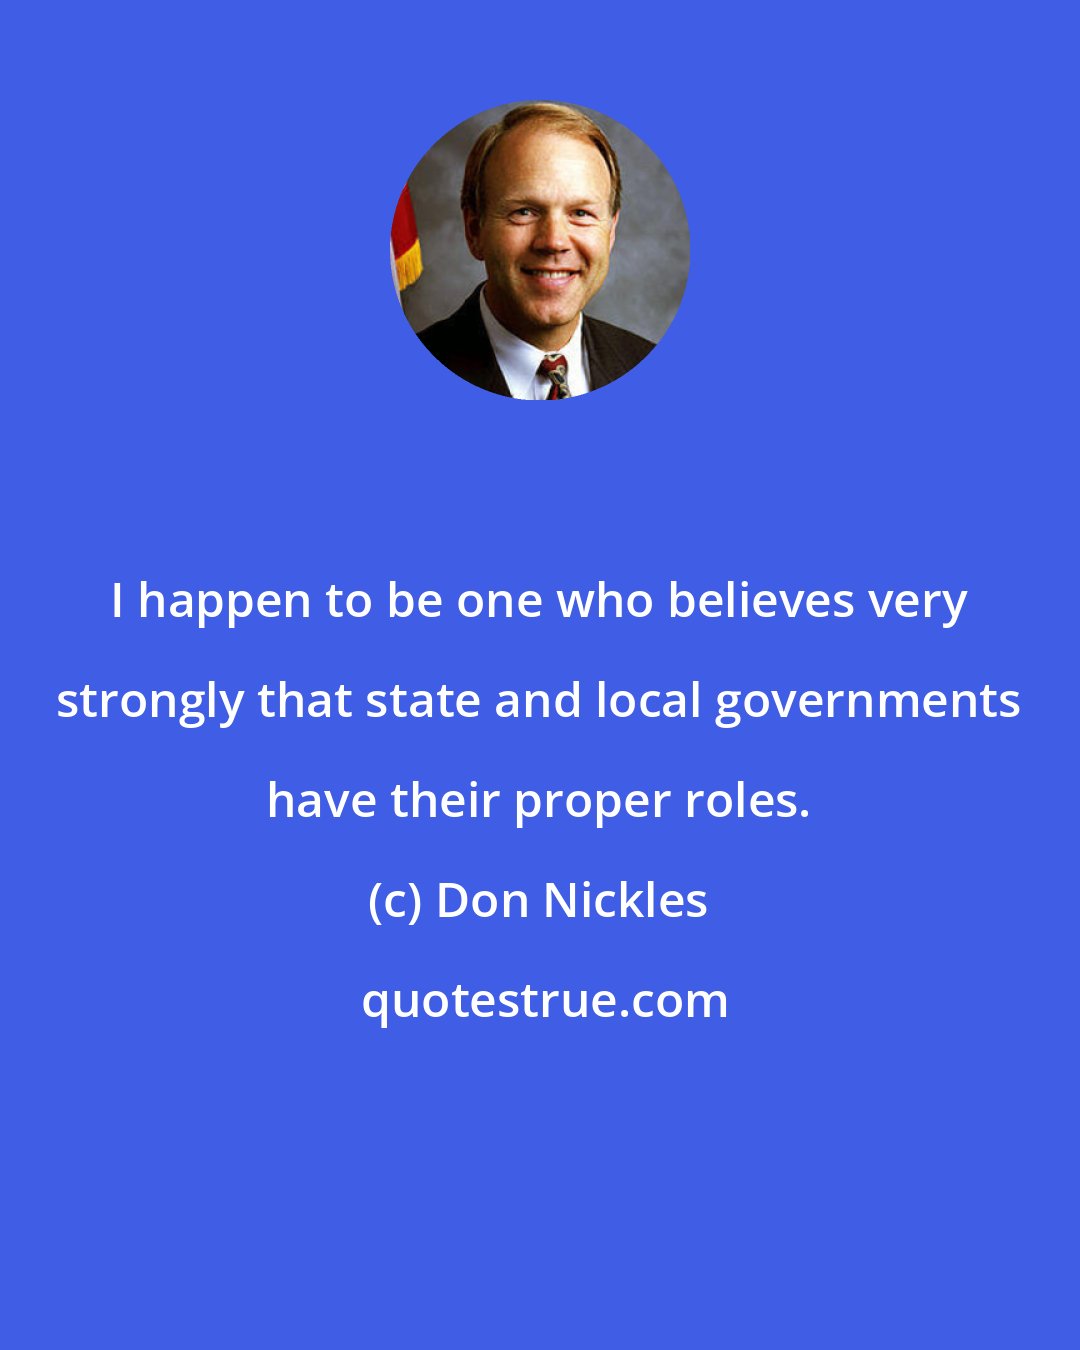 Don Nickles: I happen to be one who believes very strongly that state and local governments have their proper roles.